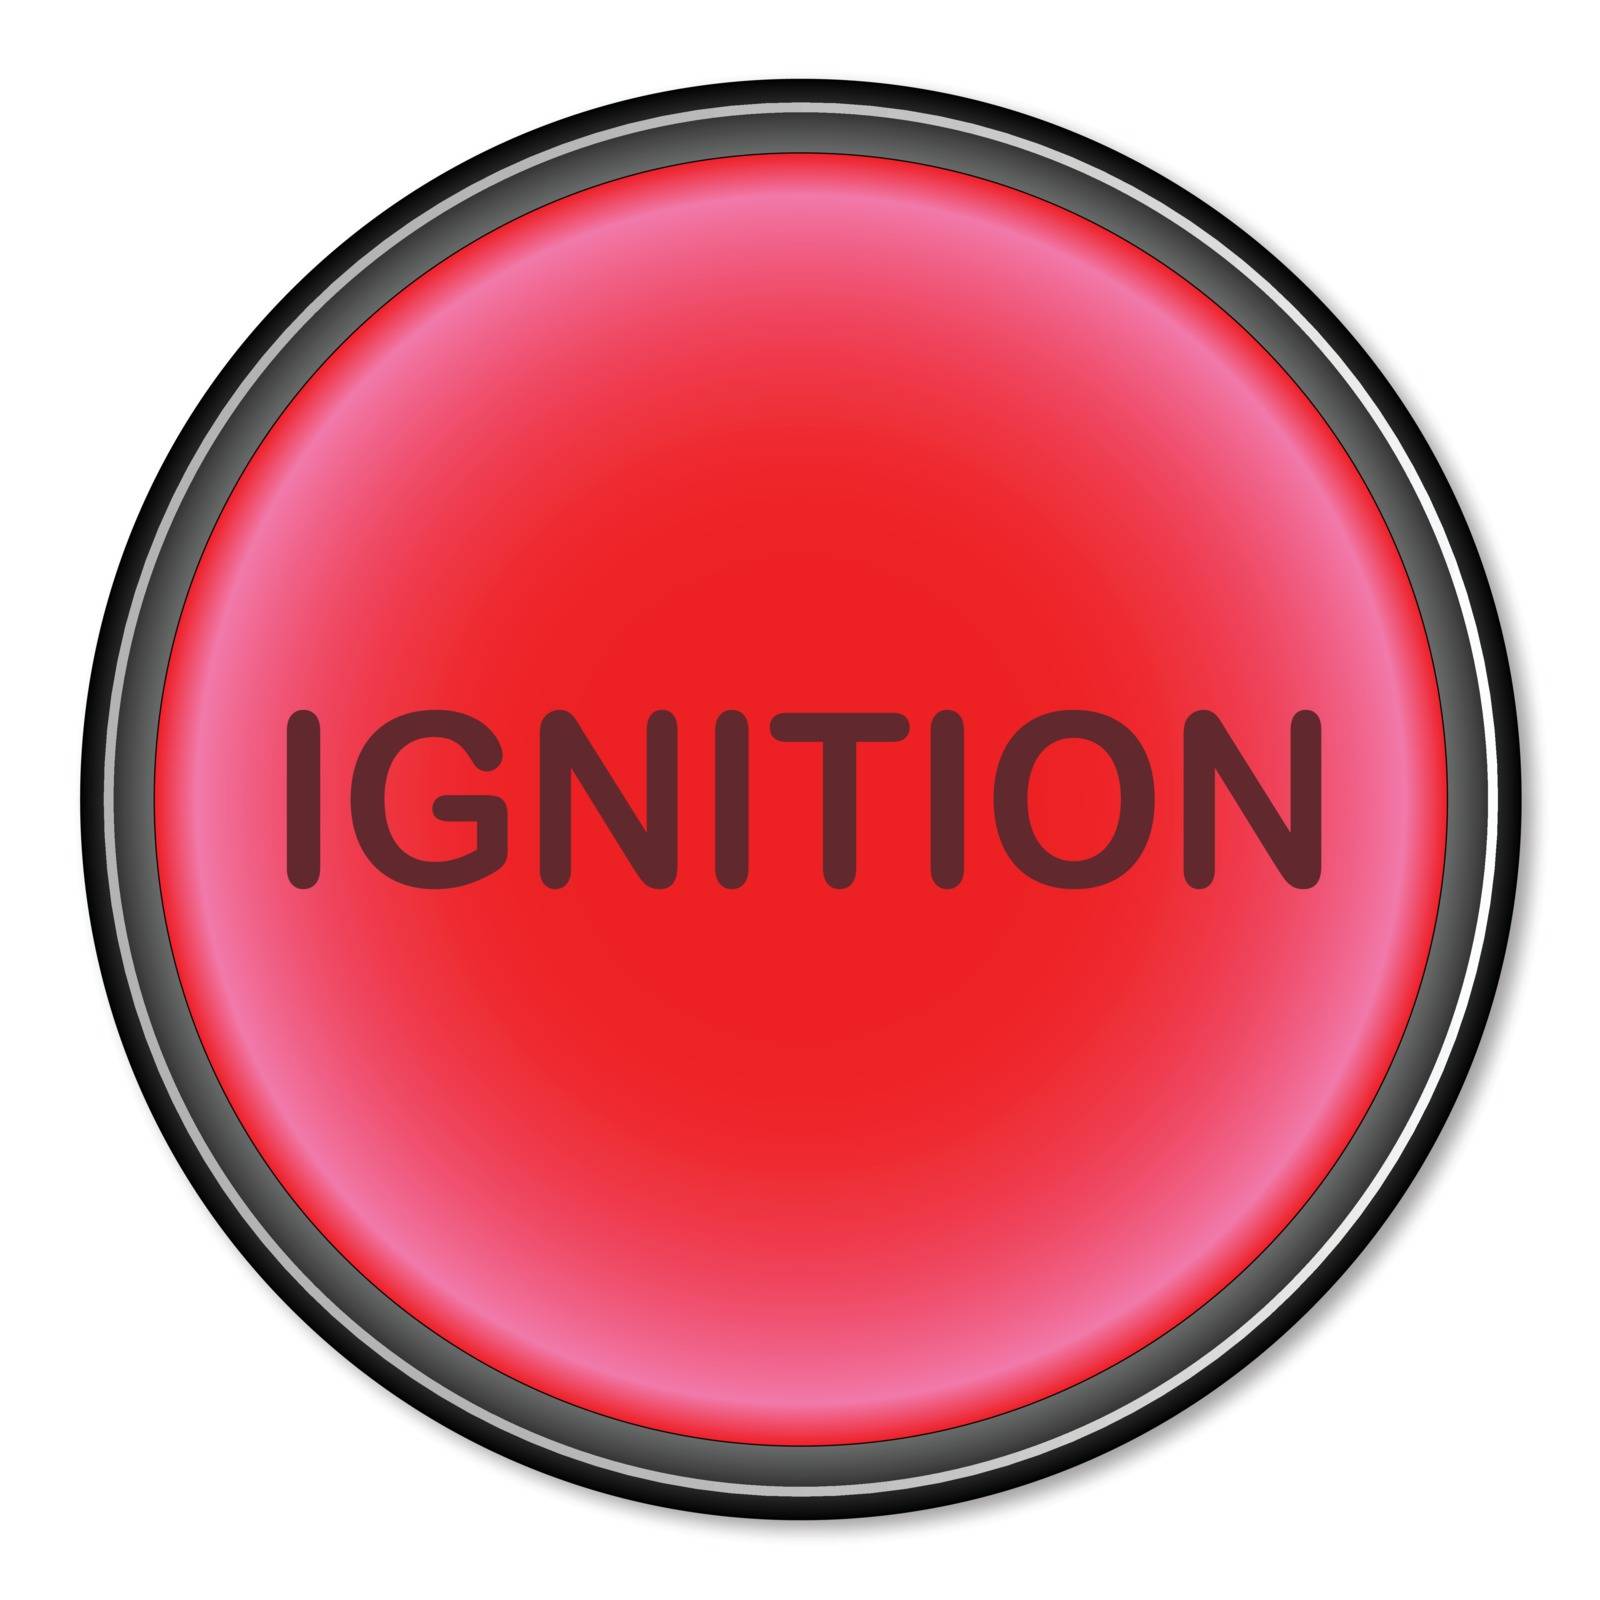 A ignition button as may be found on high explosive devices